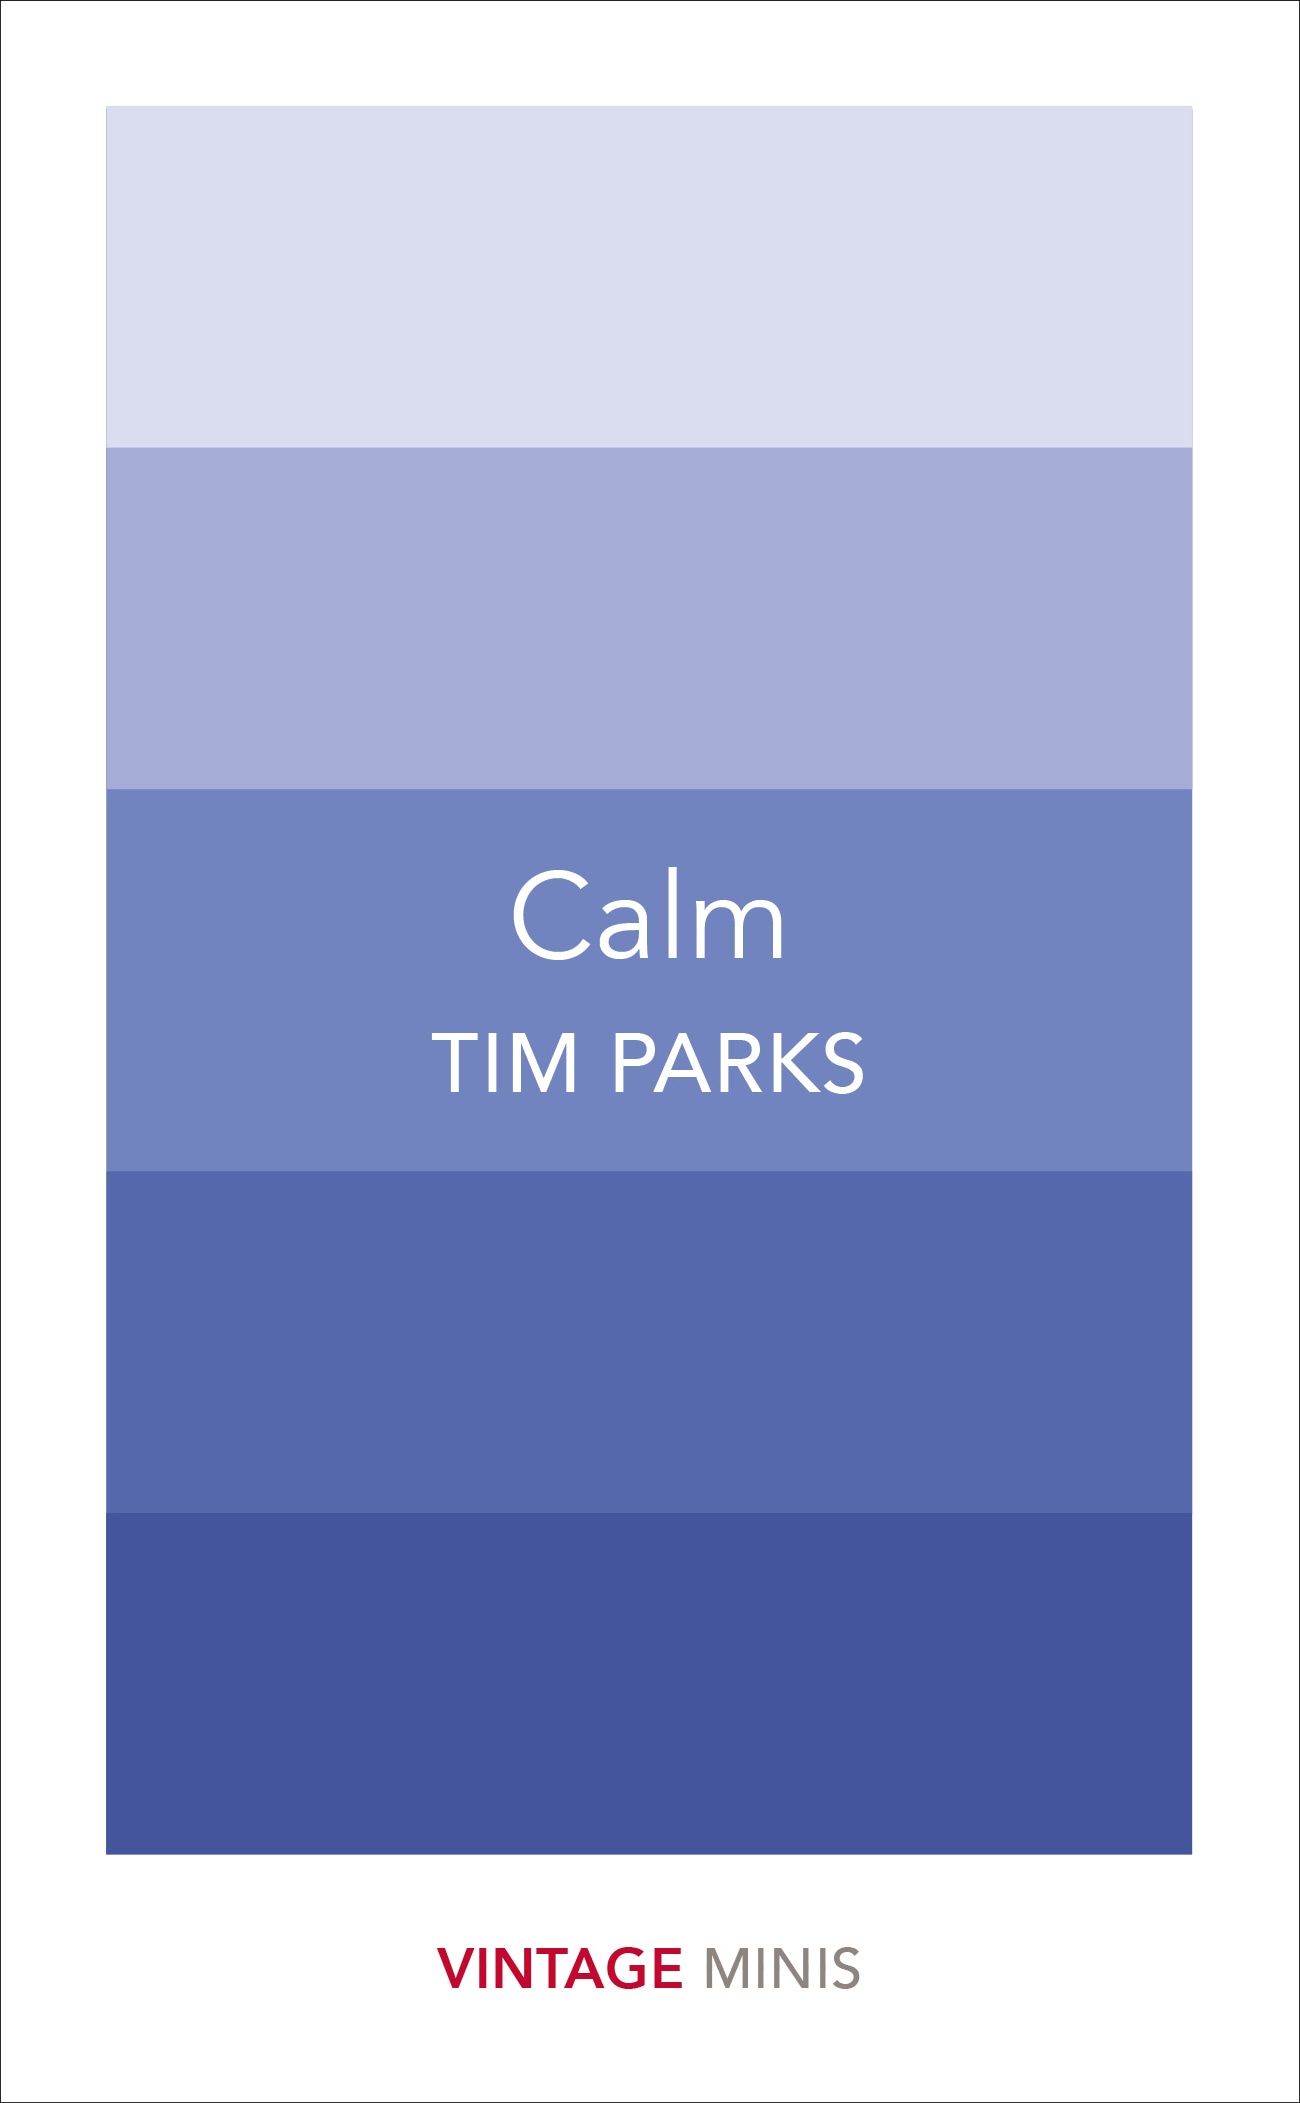 Book “Calm” by Tim Parks — June 8, 2017